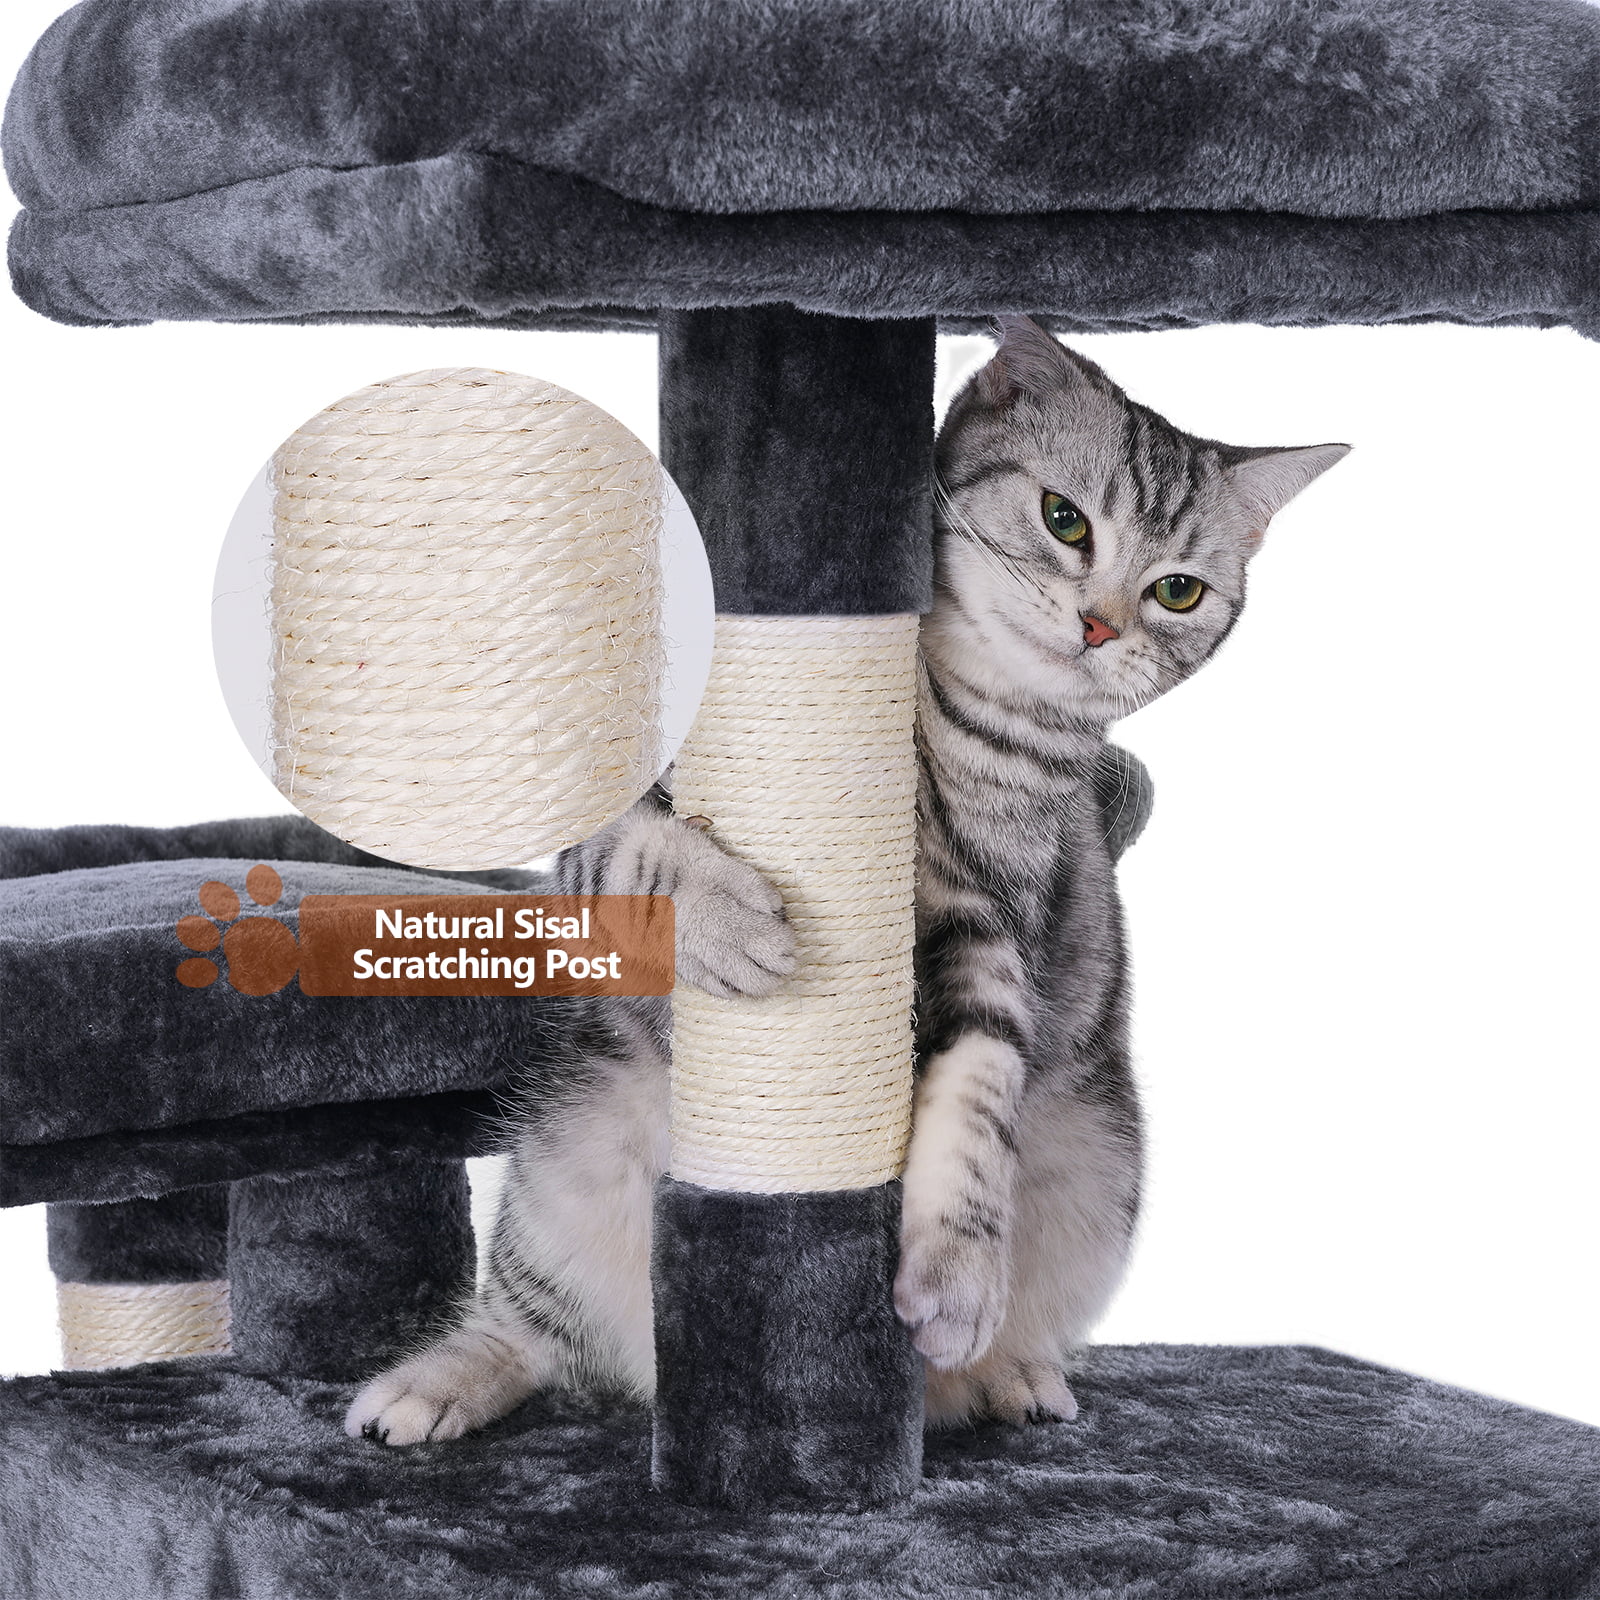 BEWISHOME Multi-Level Cat Tree Condo with Sisal Scratching Posts, Perches,  Houses, Hammock and Baskets, Cat Tower Furniture Kitty Activity Center  Kitten Play House Grey MMJ05B